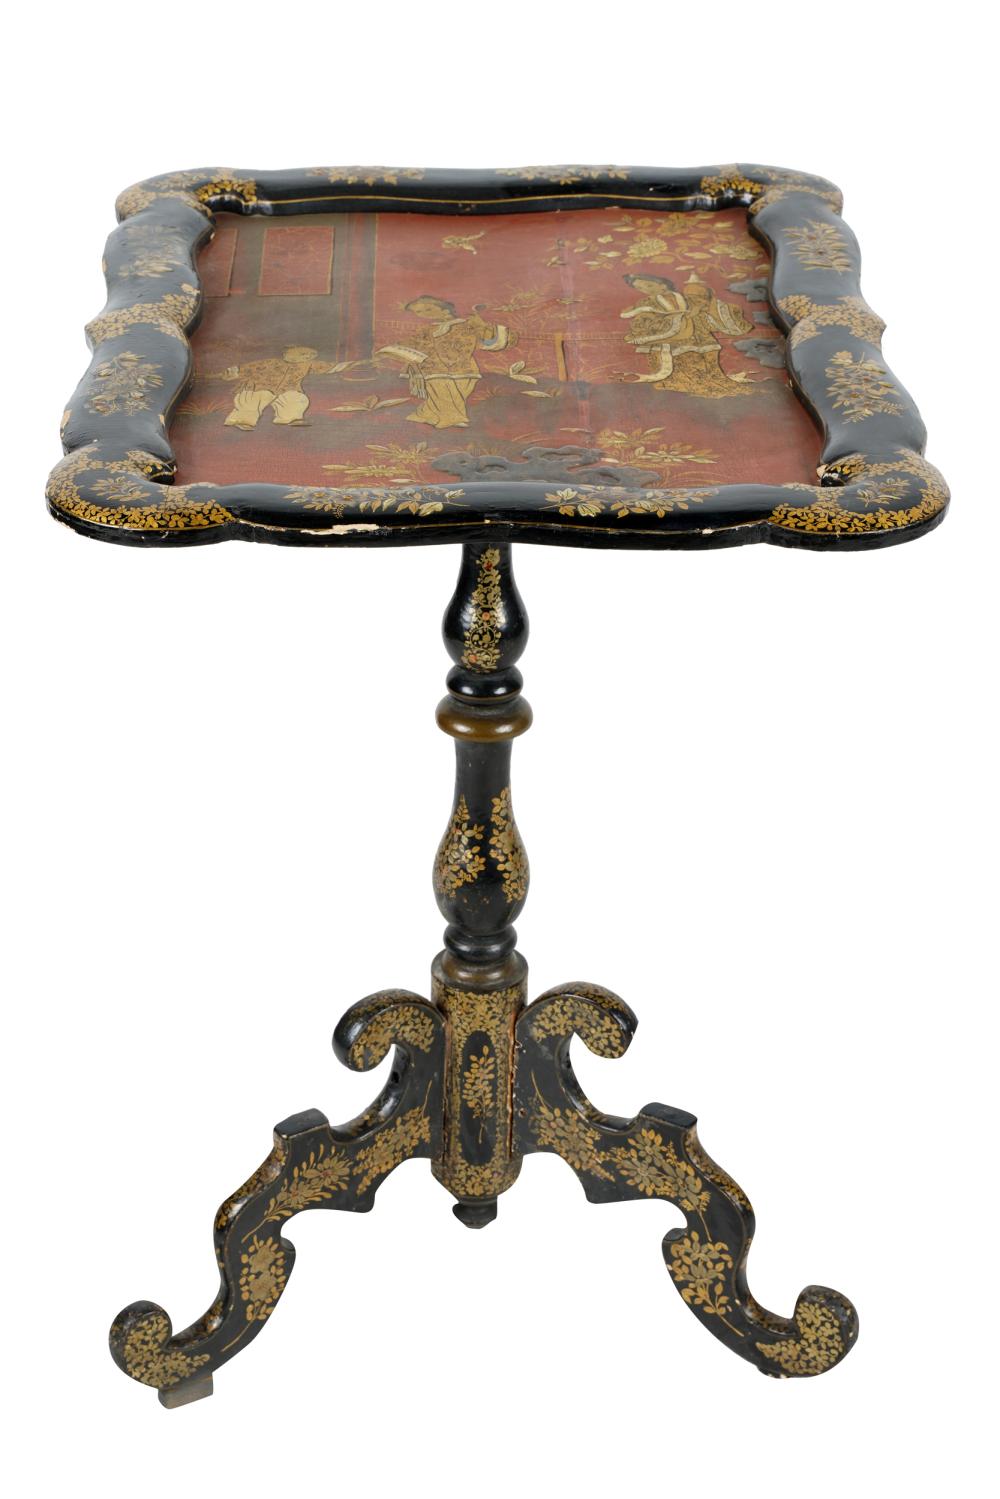 VICTORIAN CHINOISERIE LACQUERED 33313c